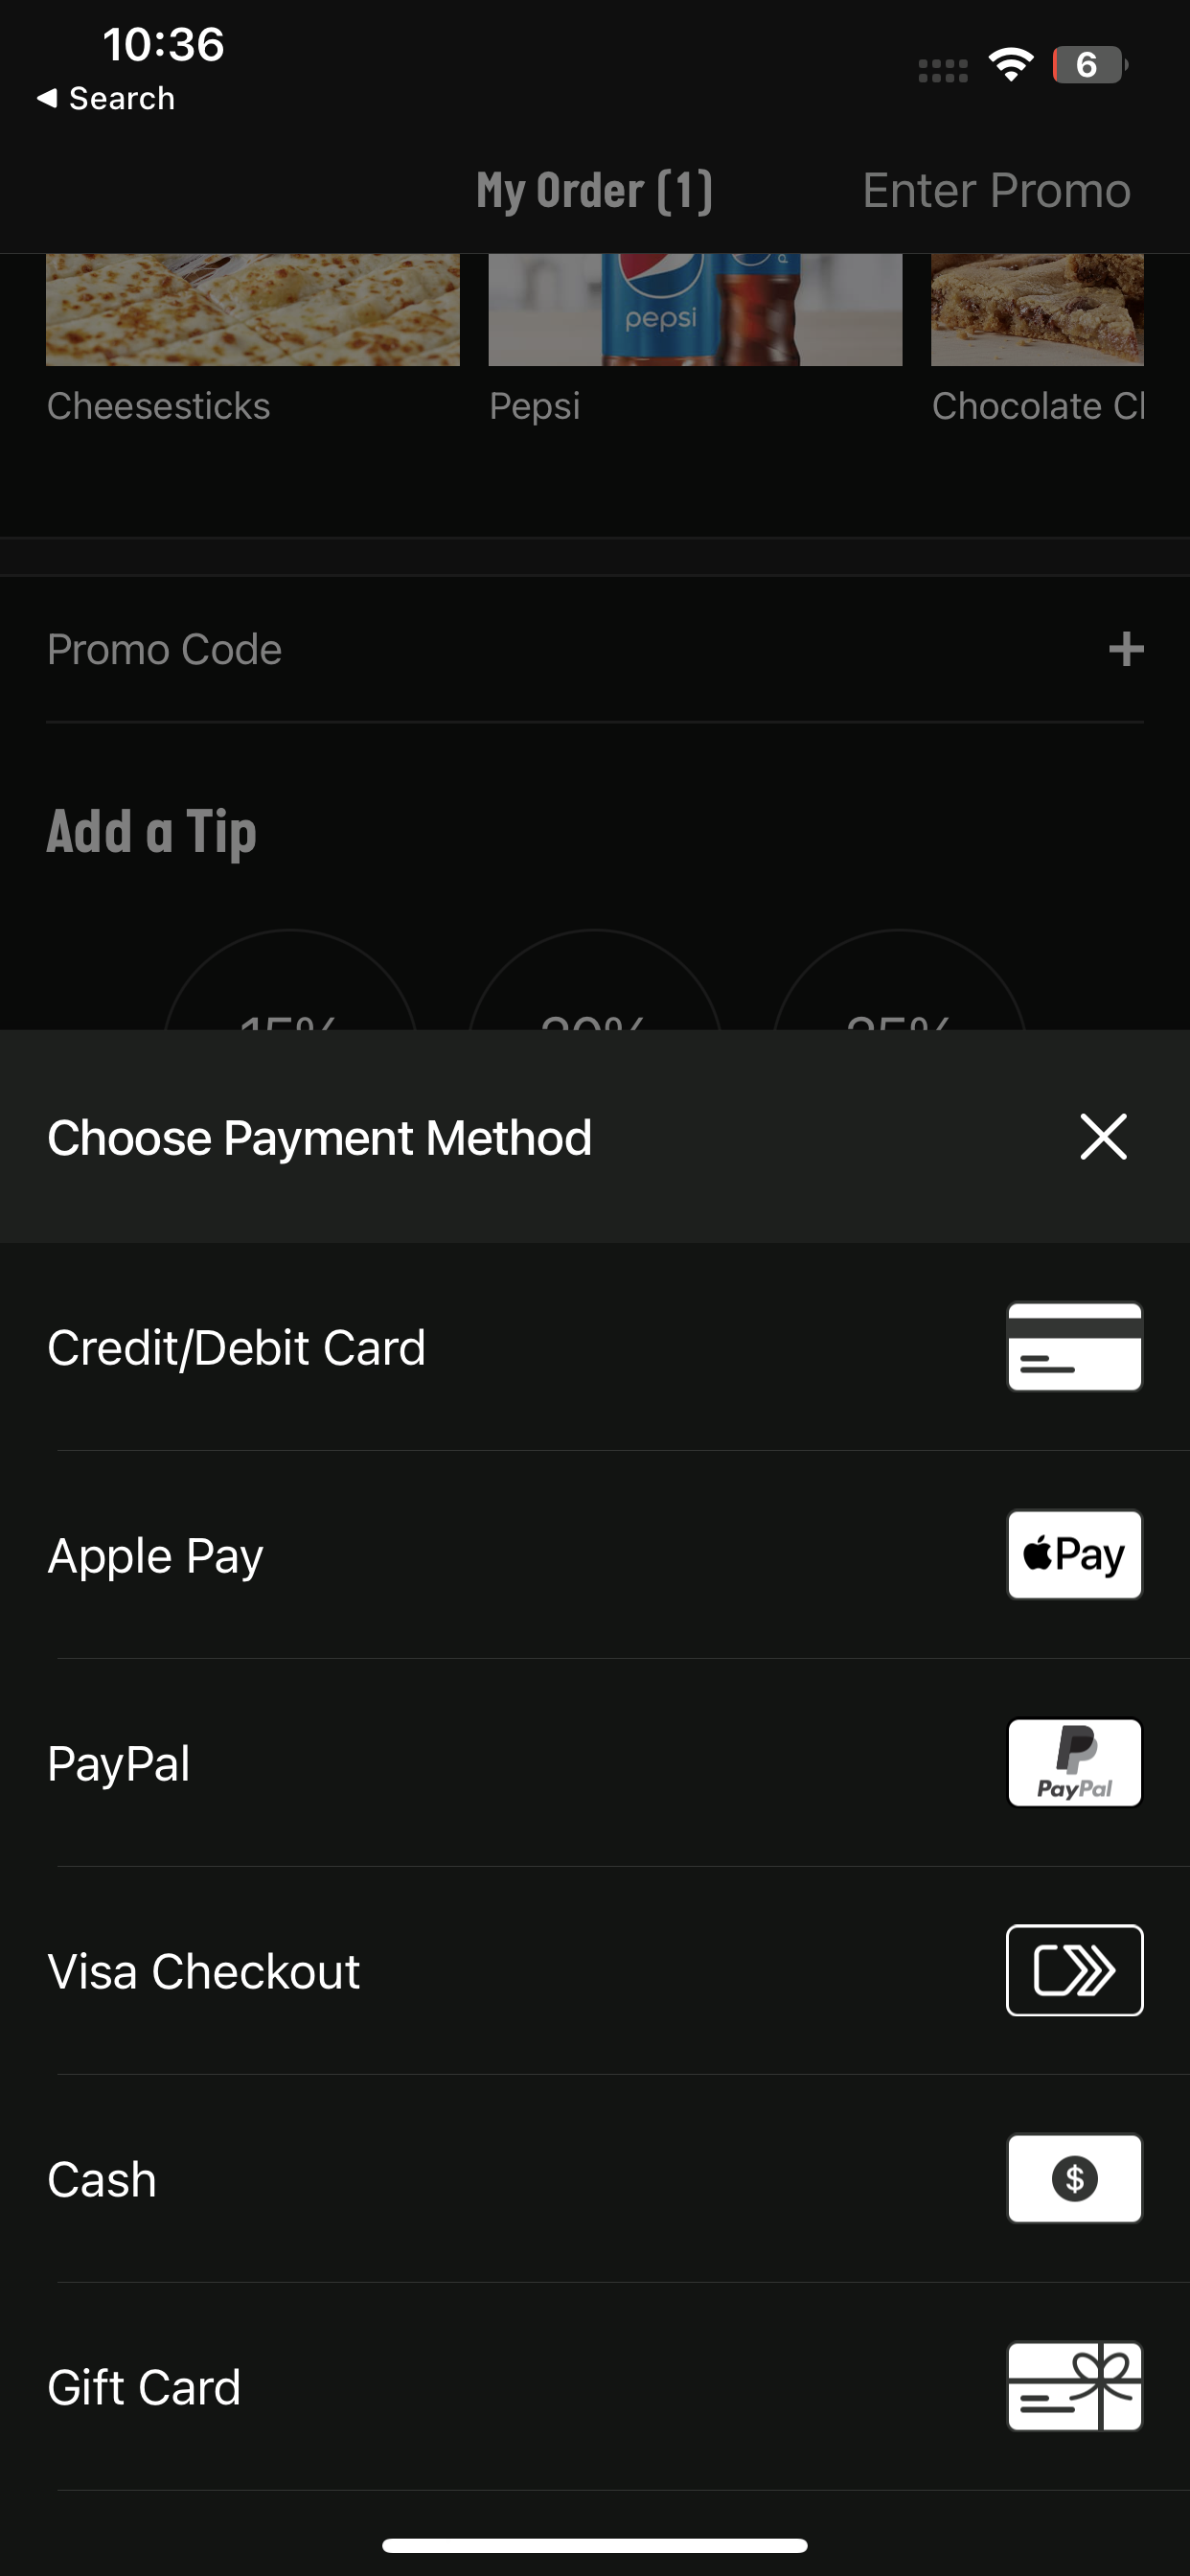 Papa John's accepts Apple Pay in its iOS app.